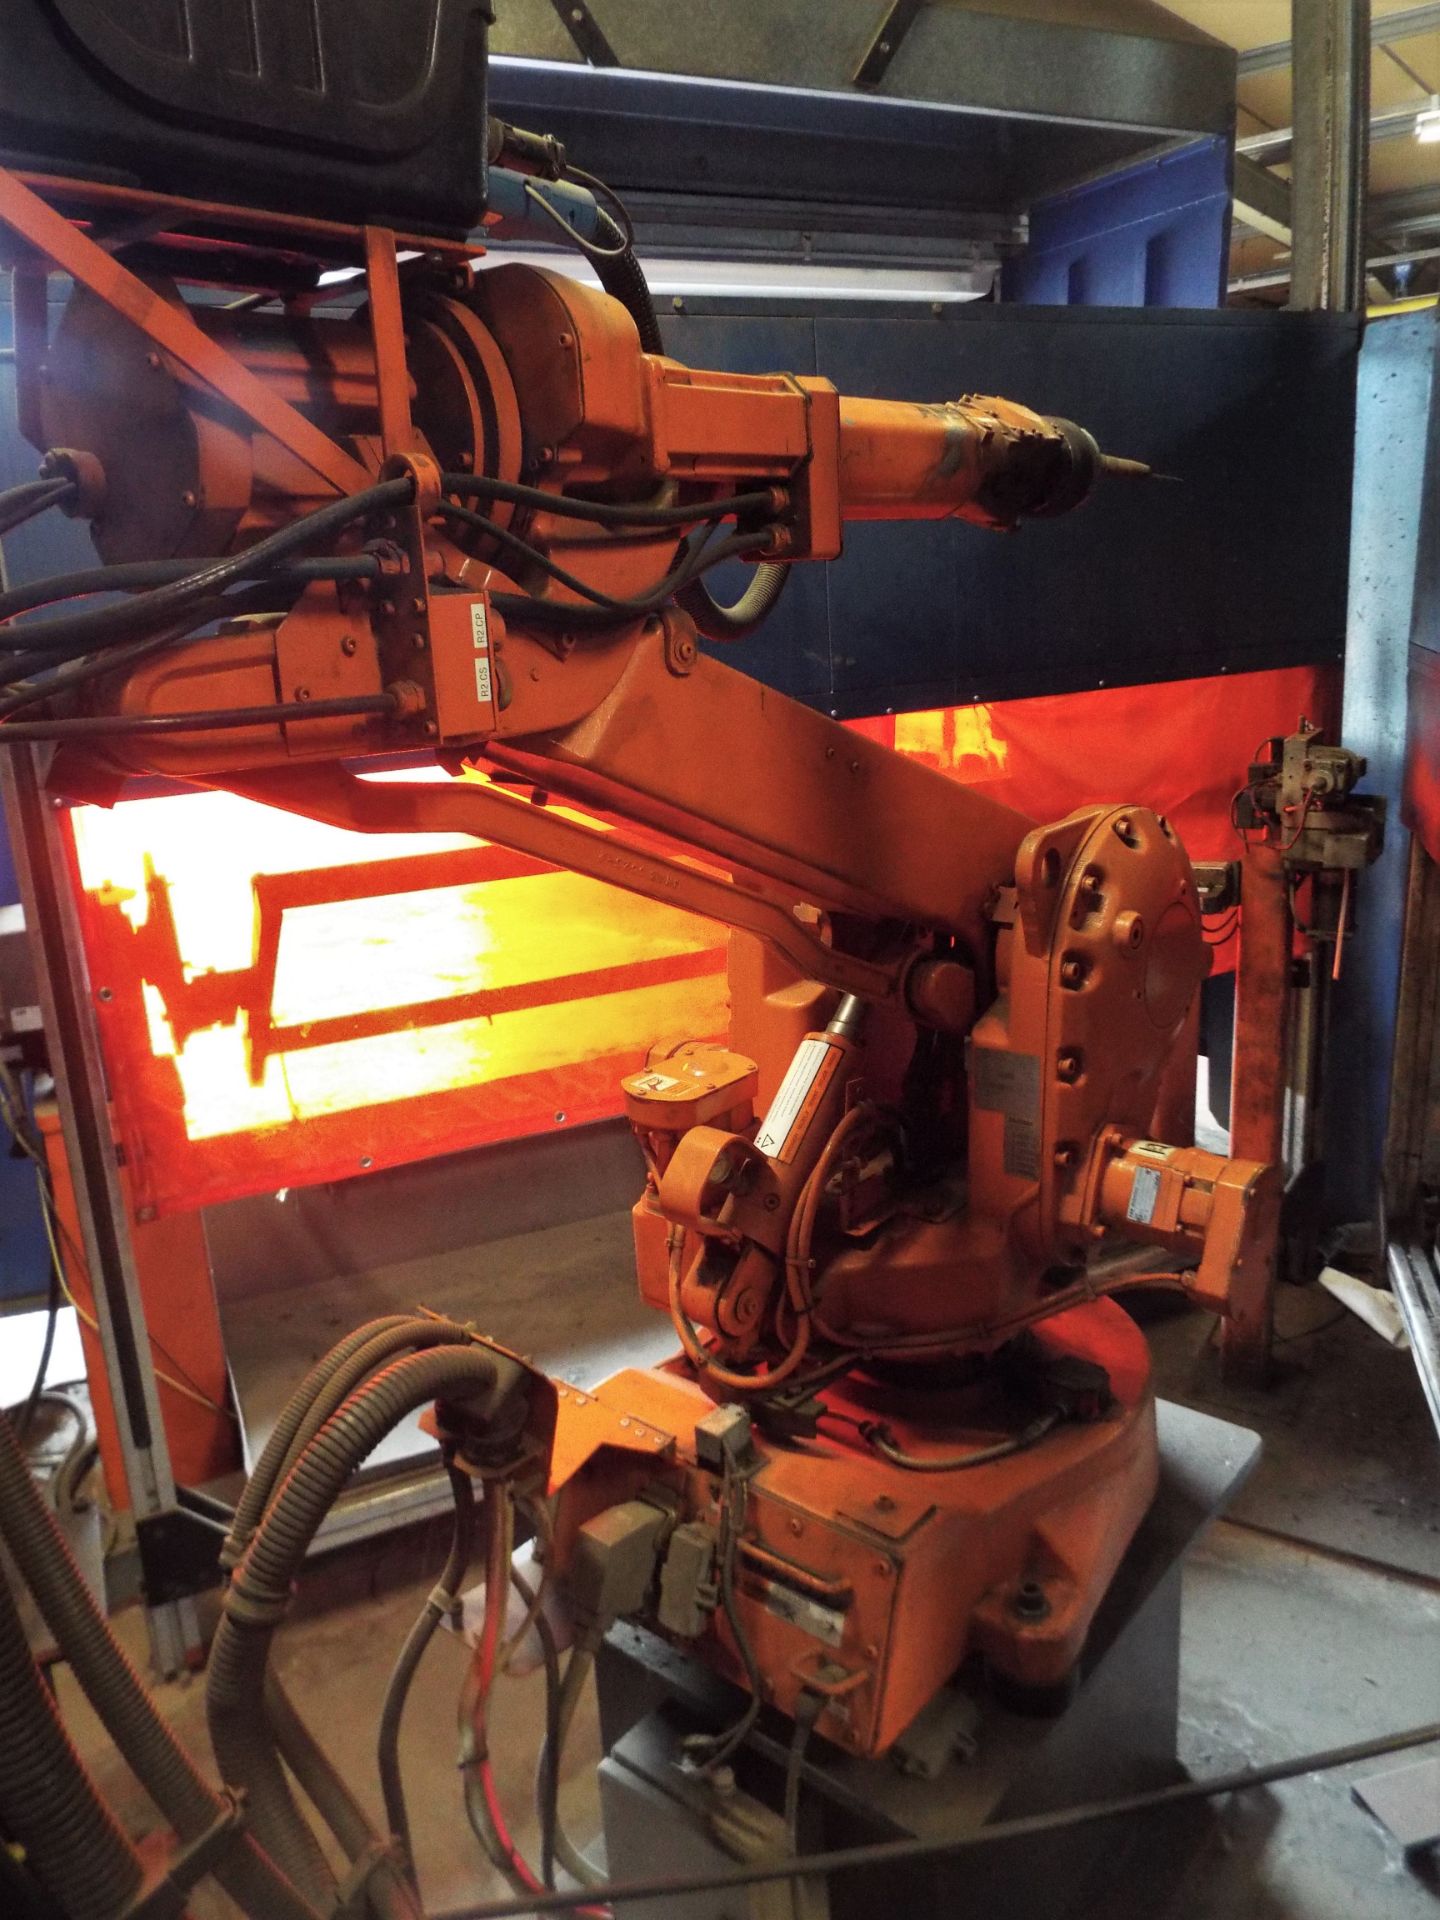 Robotic Mig Welding Cell cw 2 ABB 7th Axis Positioner - Image 9 of 19